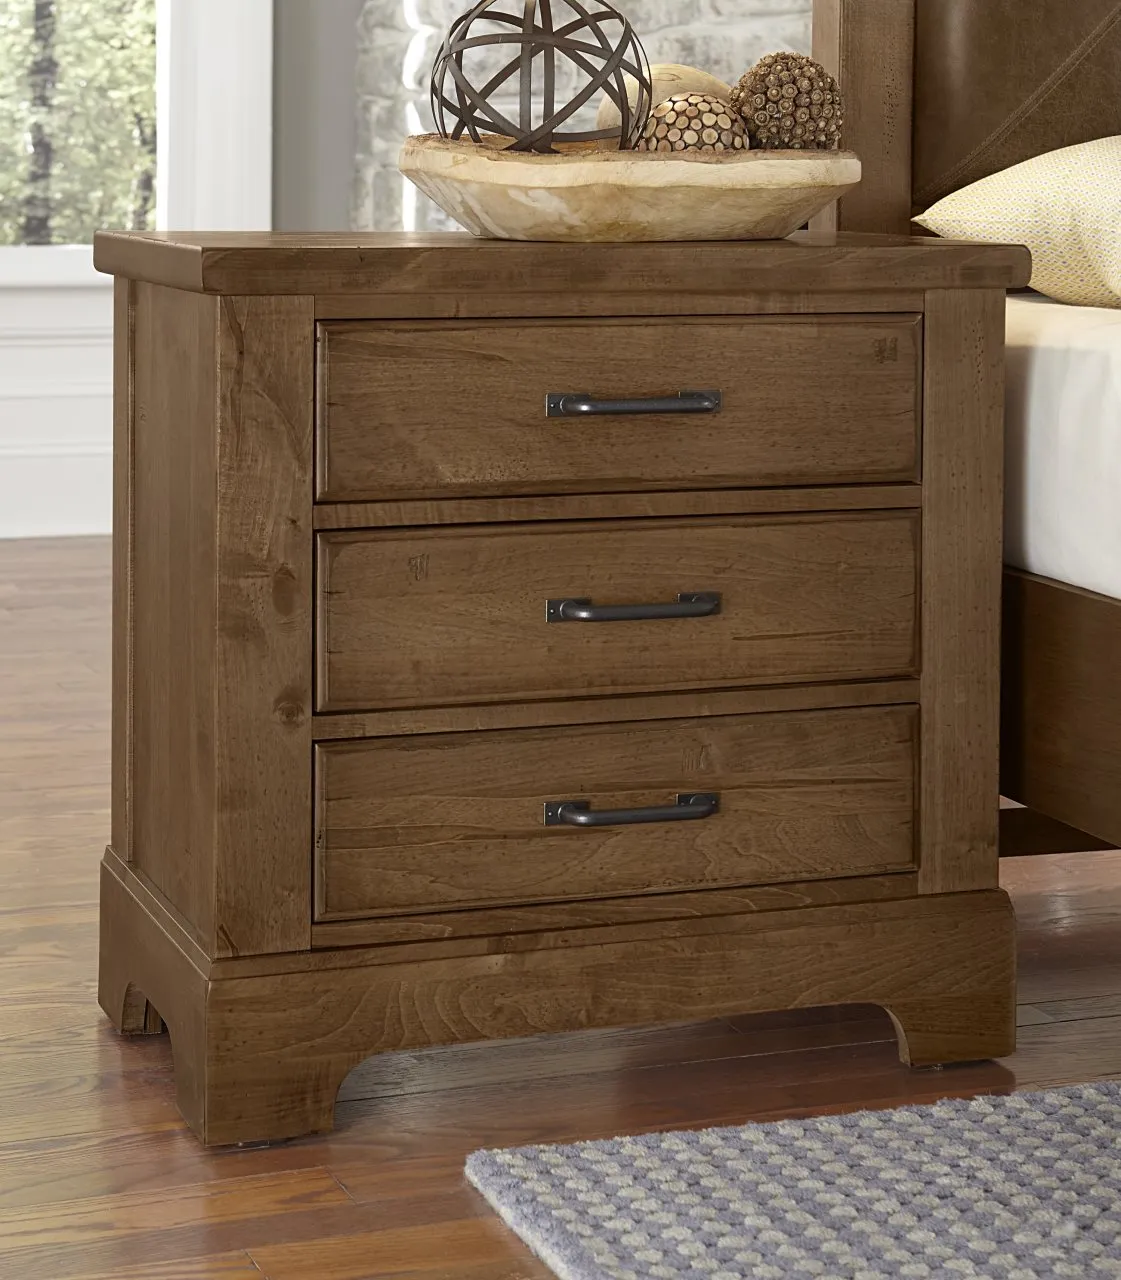 COOL RUSTIC 3 DRAWER NIGHT STAND - AMBER